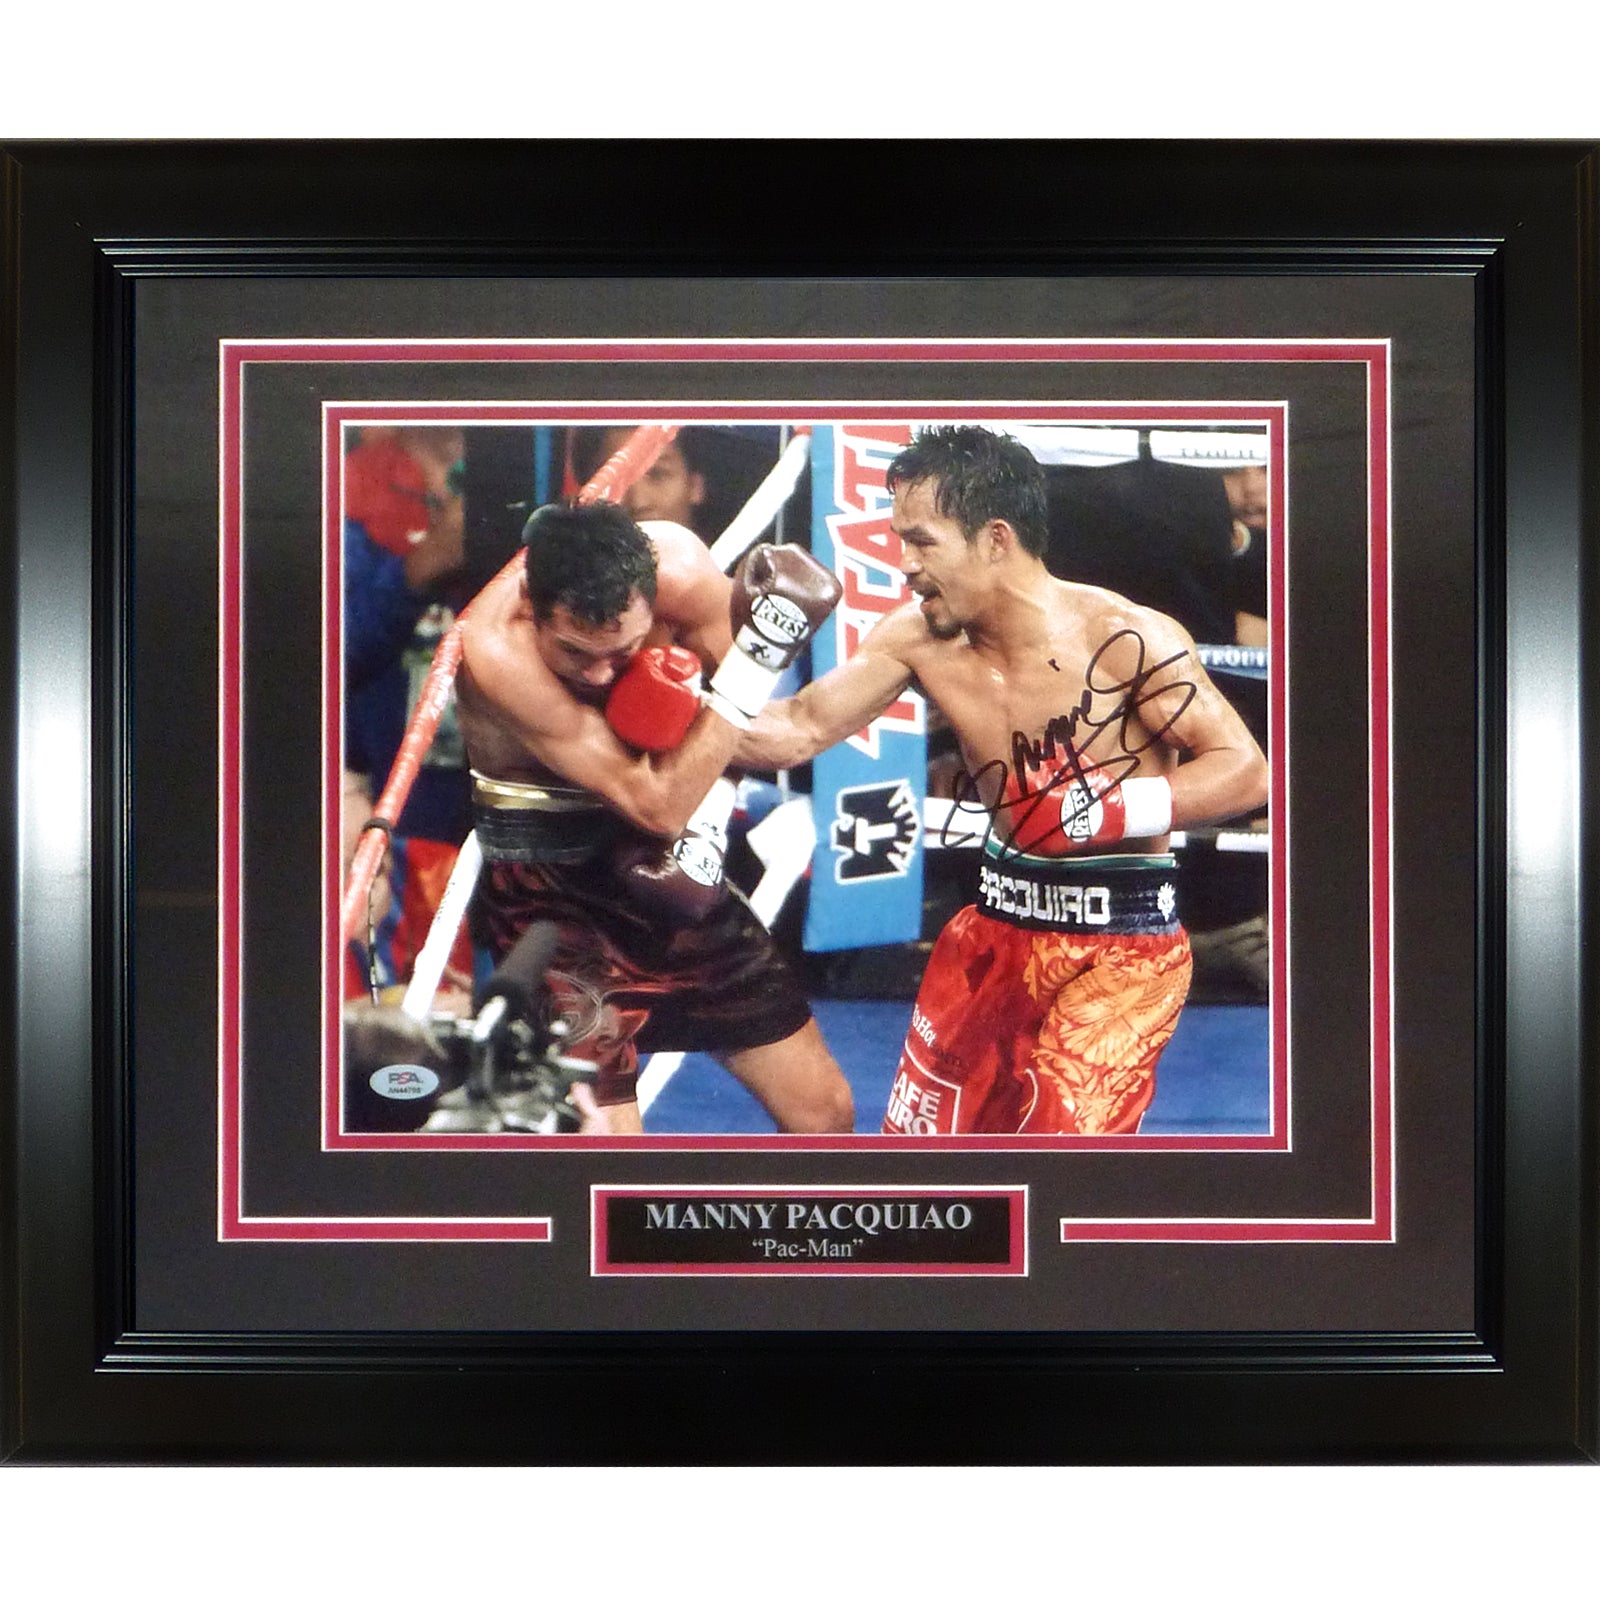 Manny Pacquiao Autographed Boxing (Horizontal) Deluxe Framed 8x10 Photo - Beckett